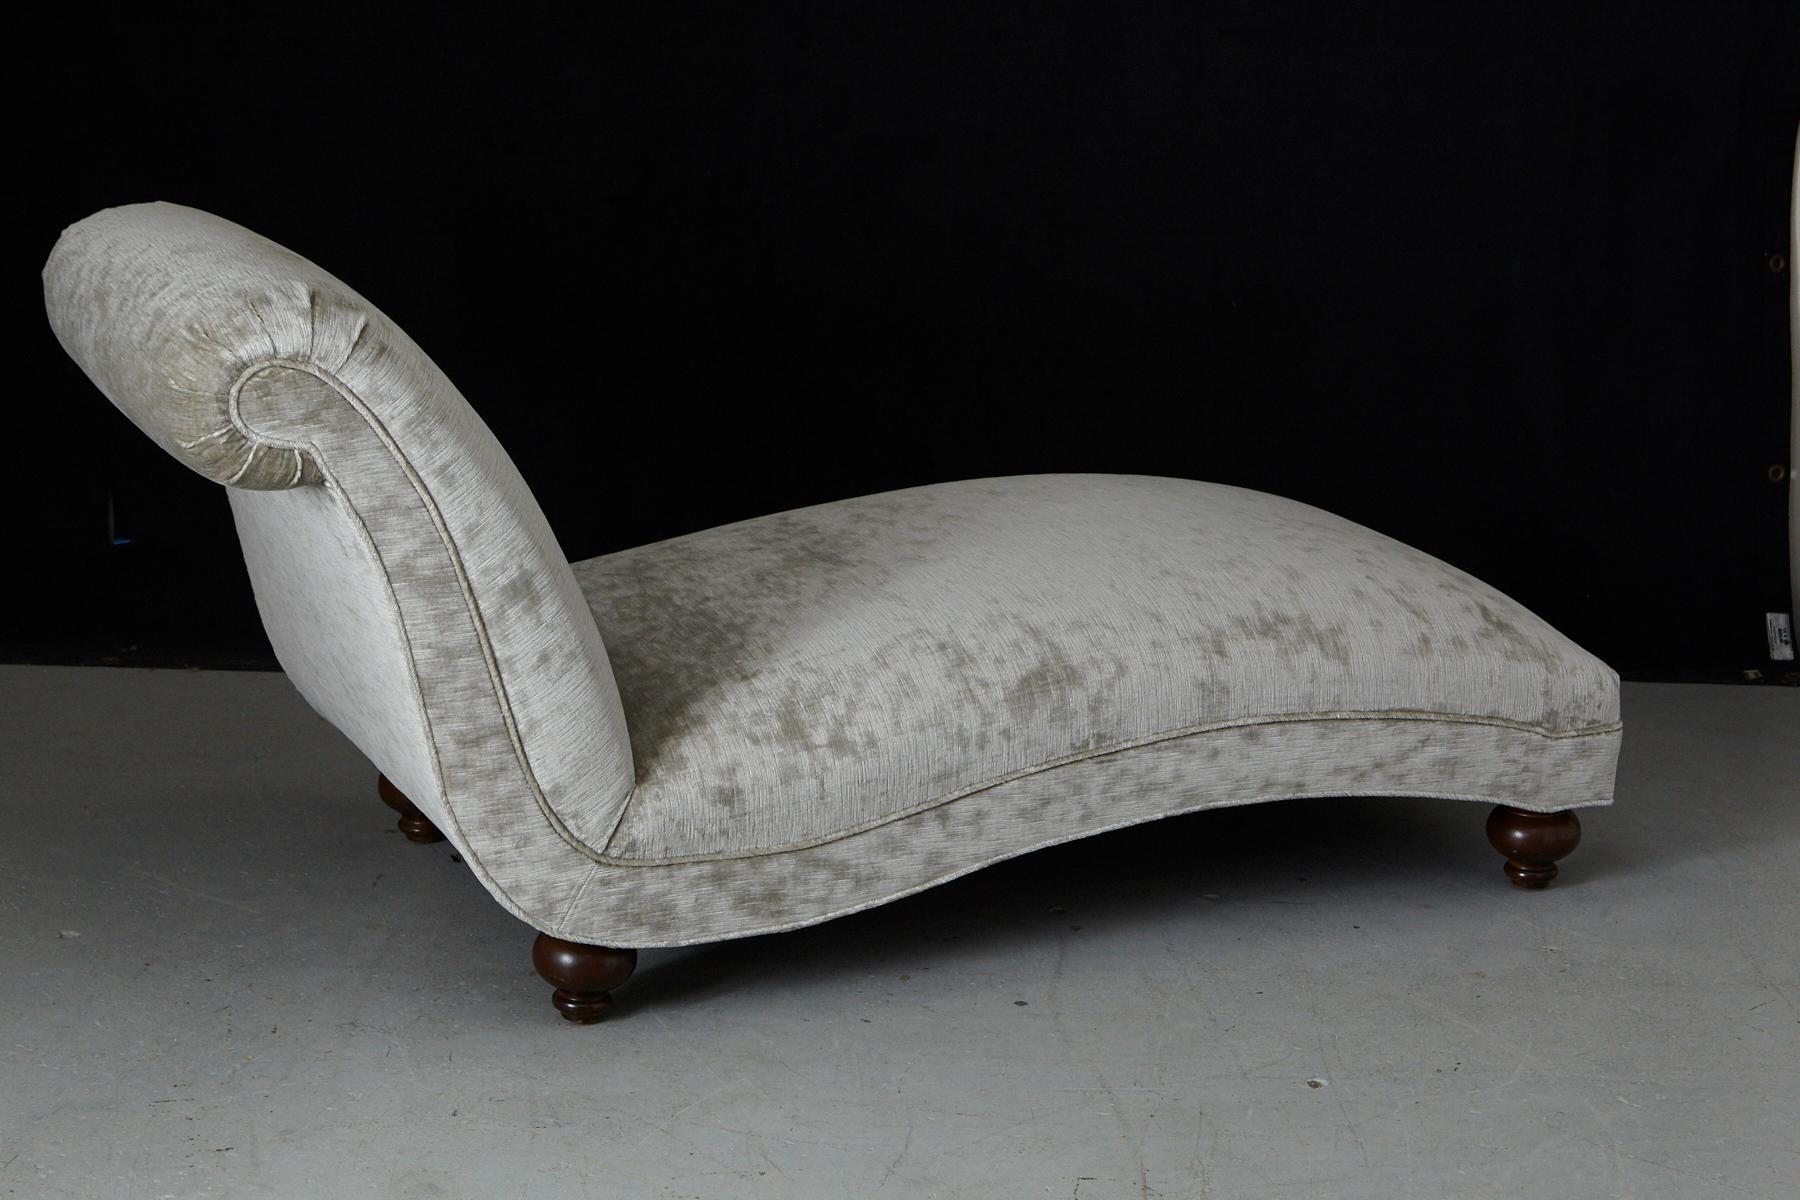 French Chaise Longue with New Upholstery in Striae Velvet, circa 1930s For Sale 1